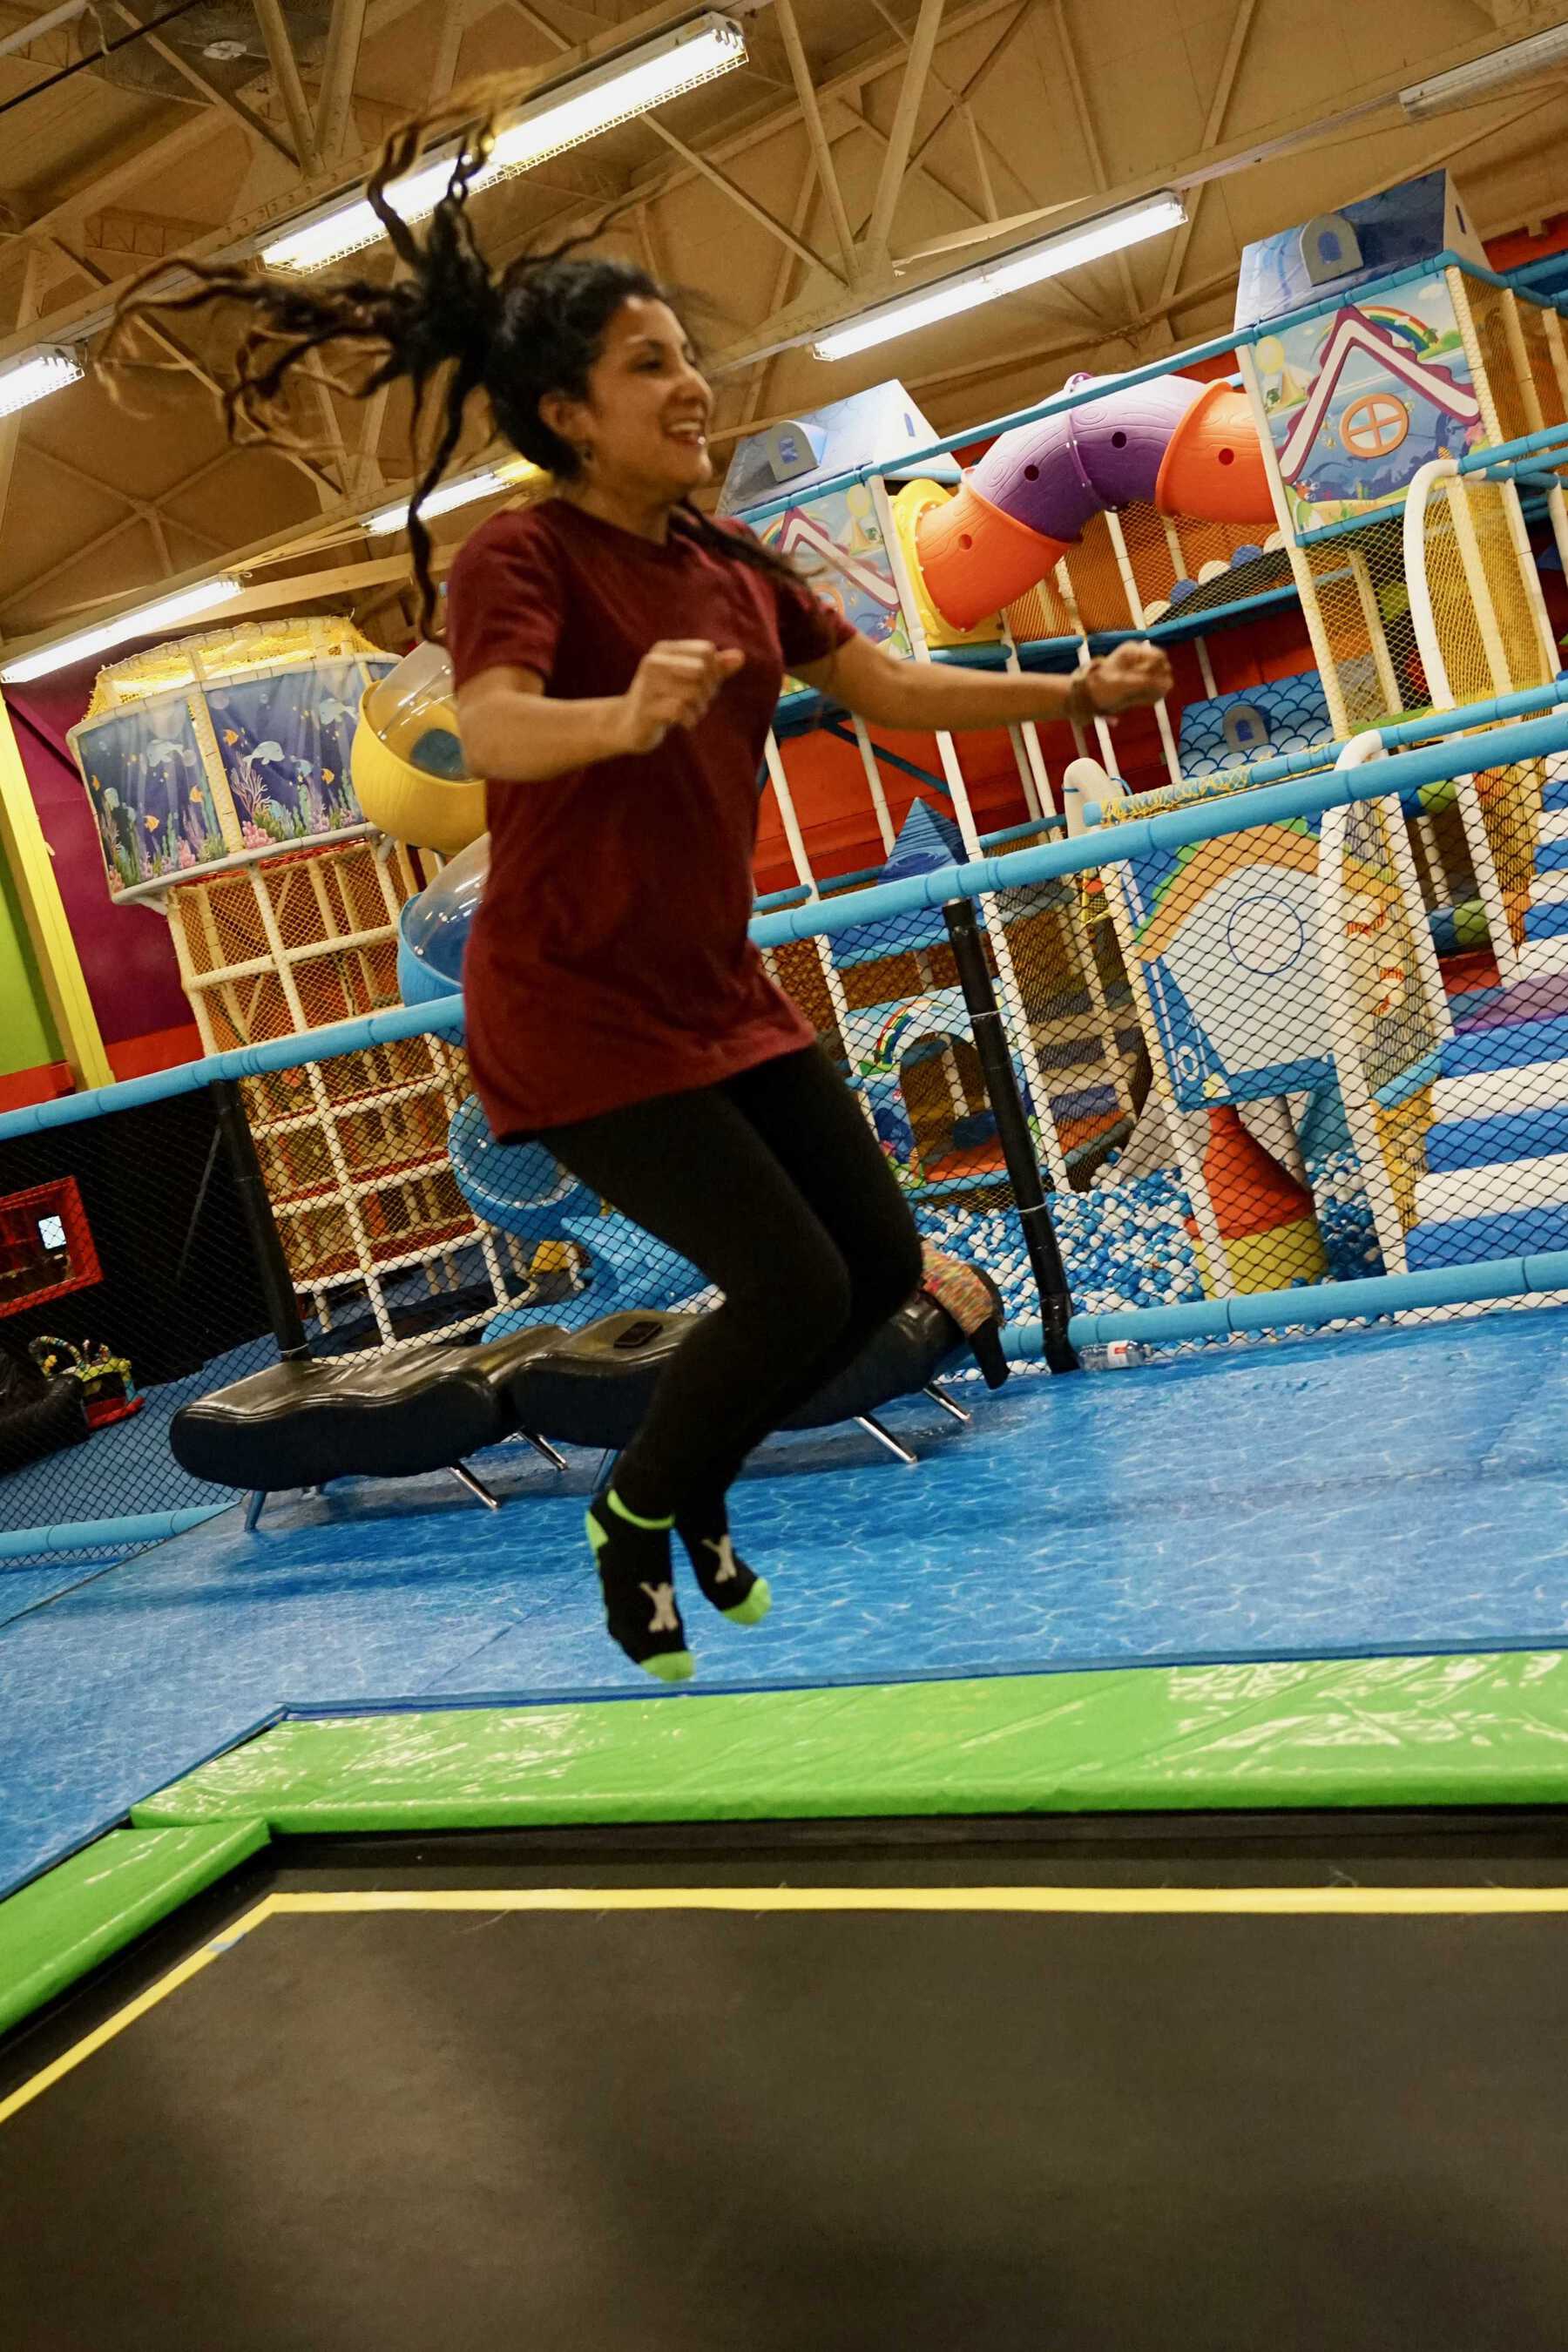 Woman smiling and jumping on trampoline